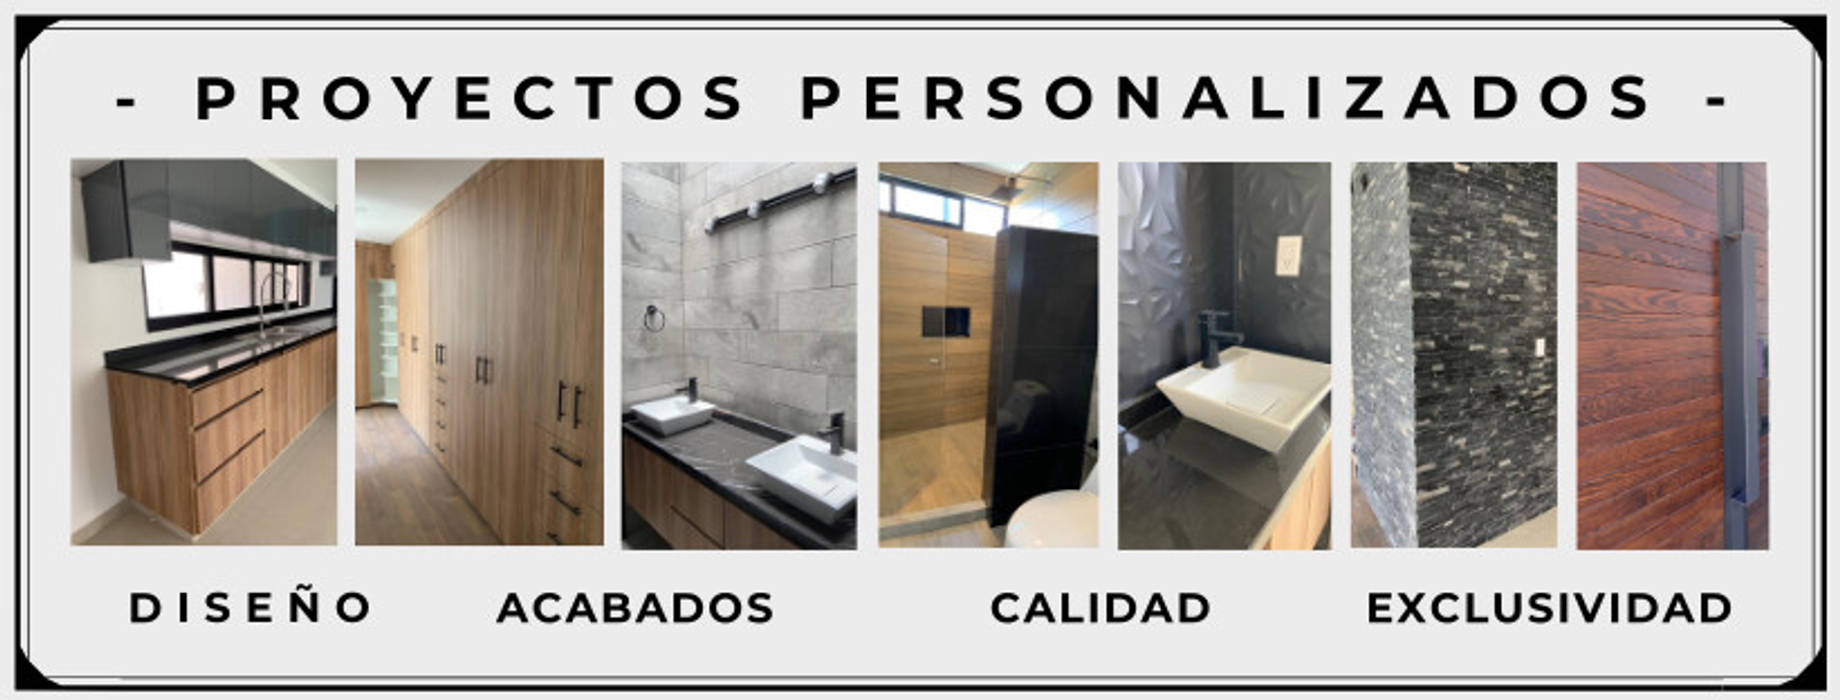 Proyectos Personalizados, Square it Square it منازل